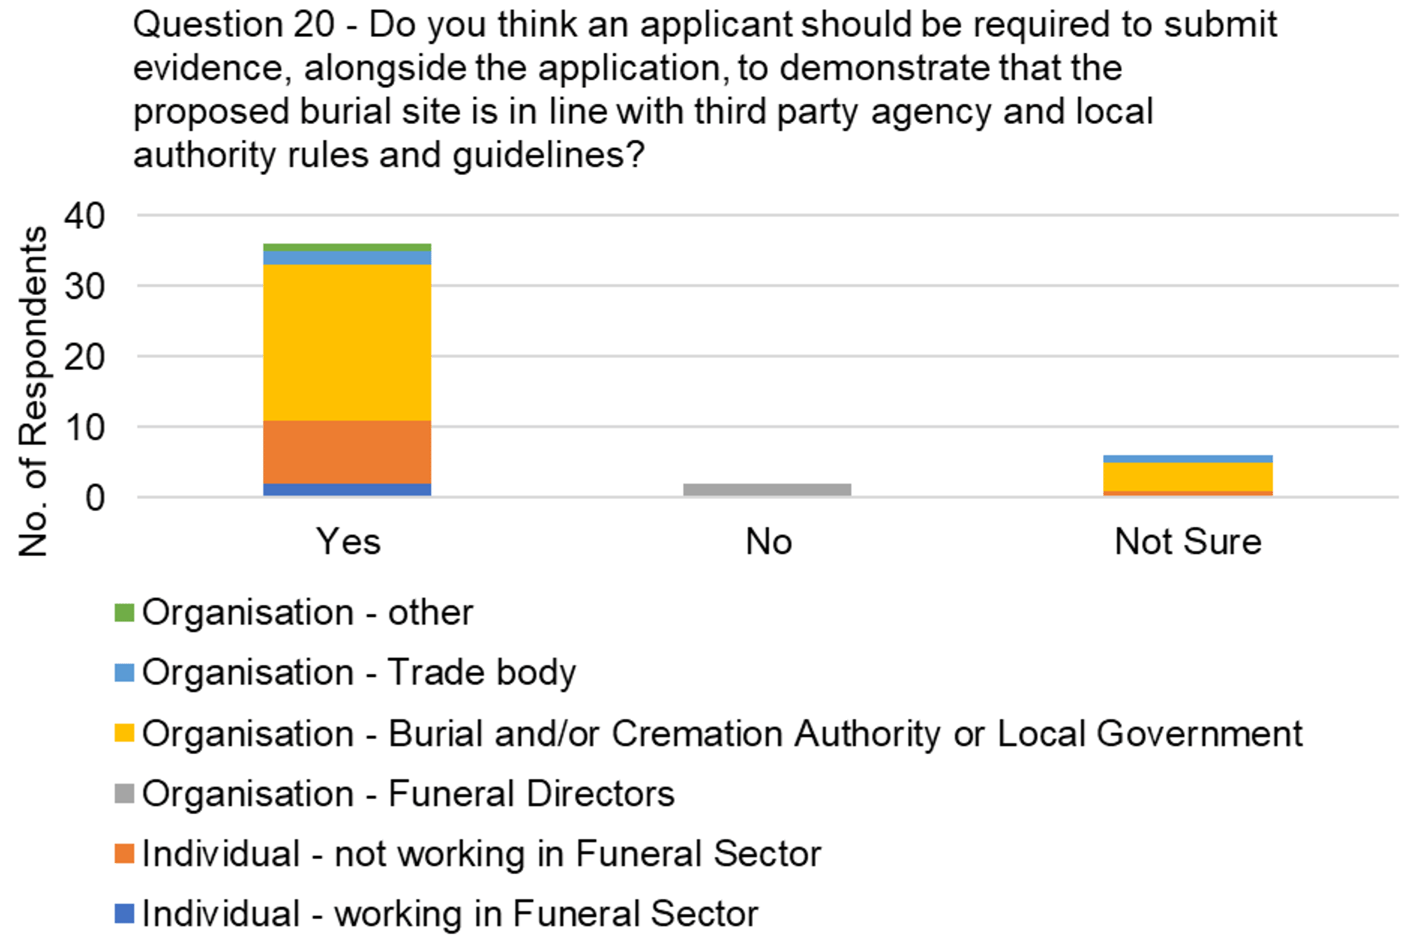 The graph visually presents the data from table 15, focussing on the responses to the question, "Do you think an applicant should be required to submit evidence, alongside the application, to demonstrate that the proposed burial site is in line with third party agency and local authority rules and guidelines?"